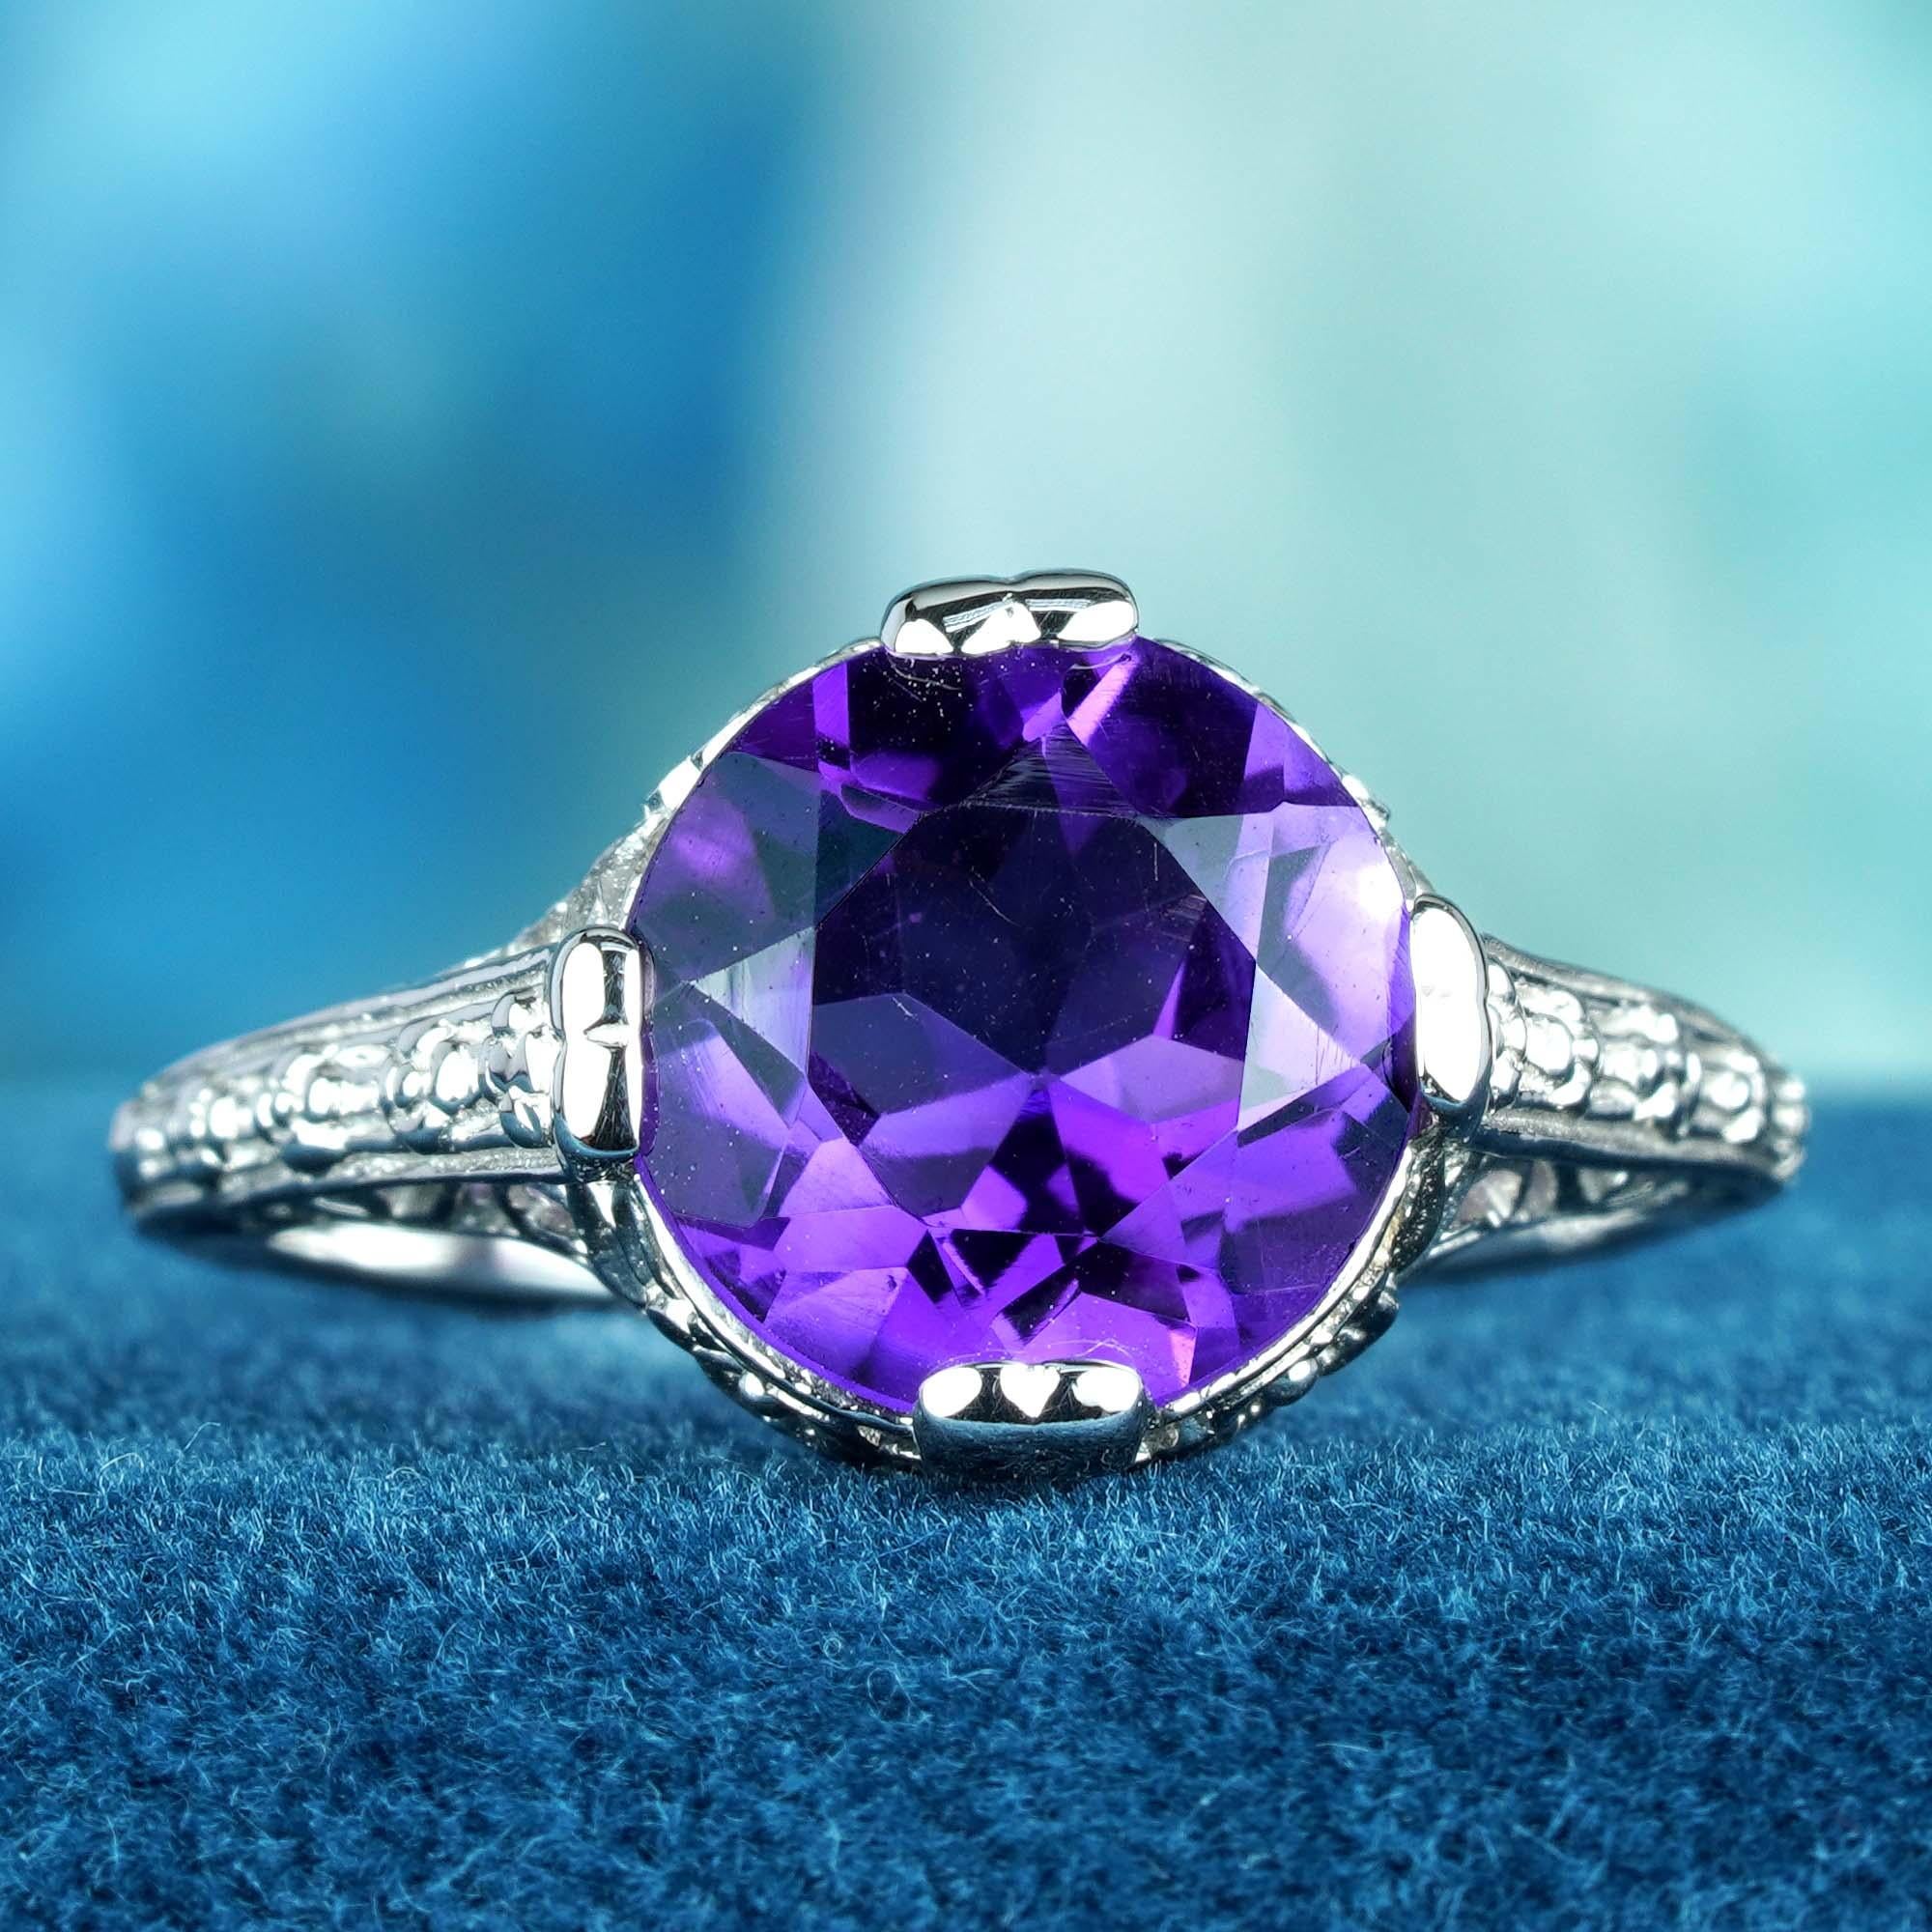 For Sale:  Natural Round Amethyst Vintage Style Filigree Ring in Solid 9K White Gold 3